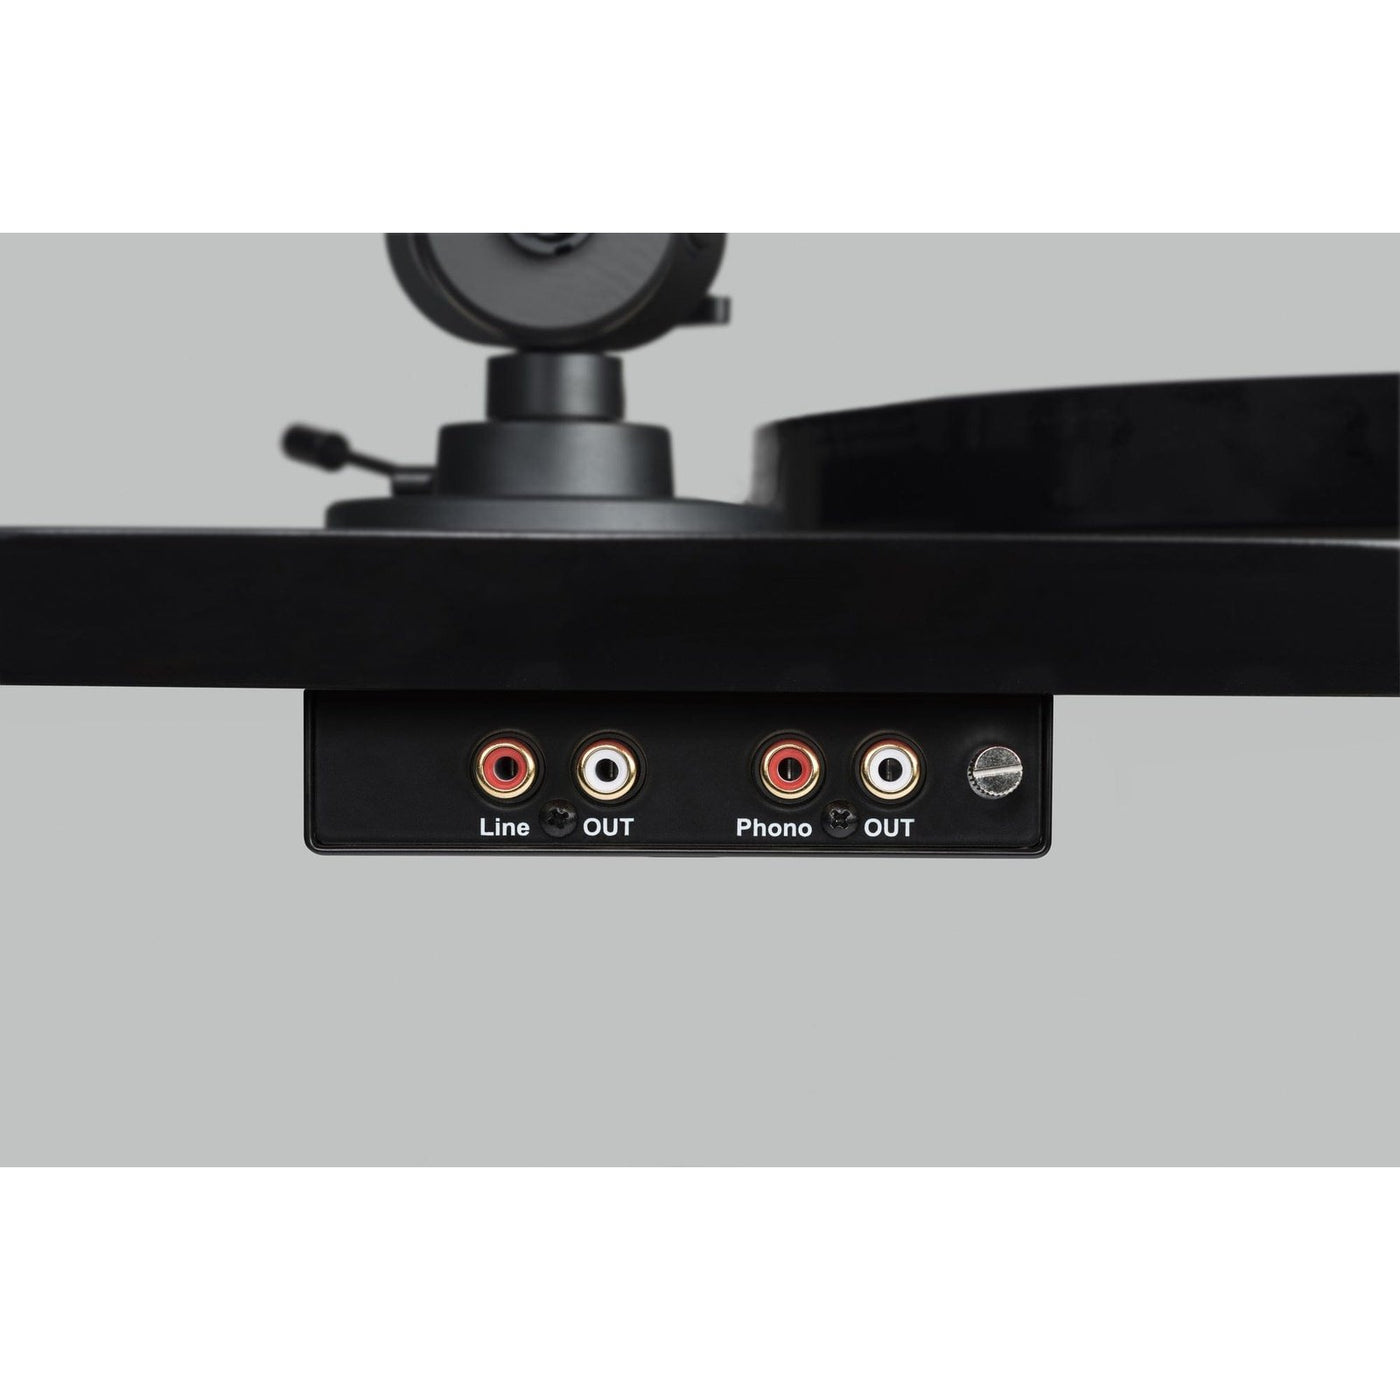 Pro-Ject Pro-Ject E1 BT Turntable with Phono Preamp & Bluetooth Transmitter Turntables